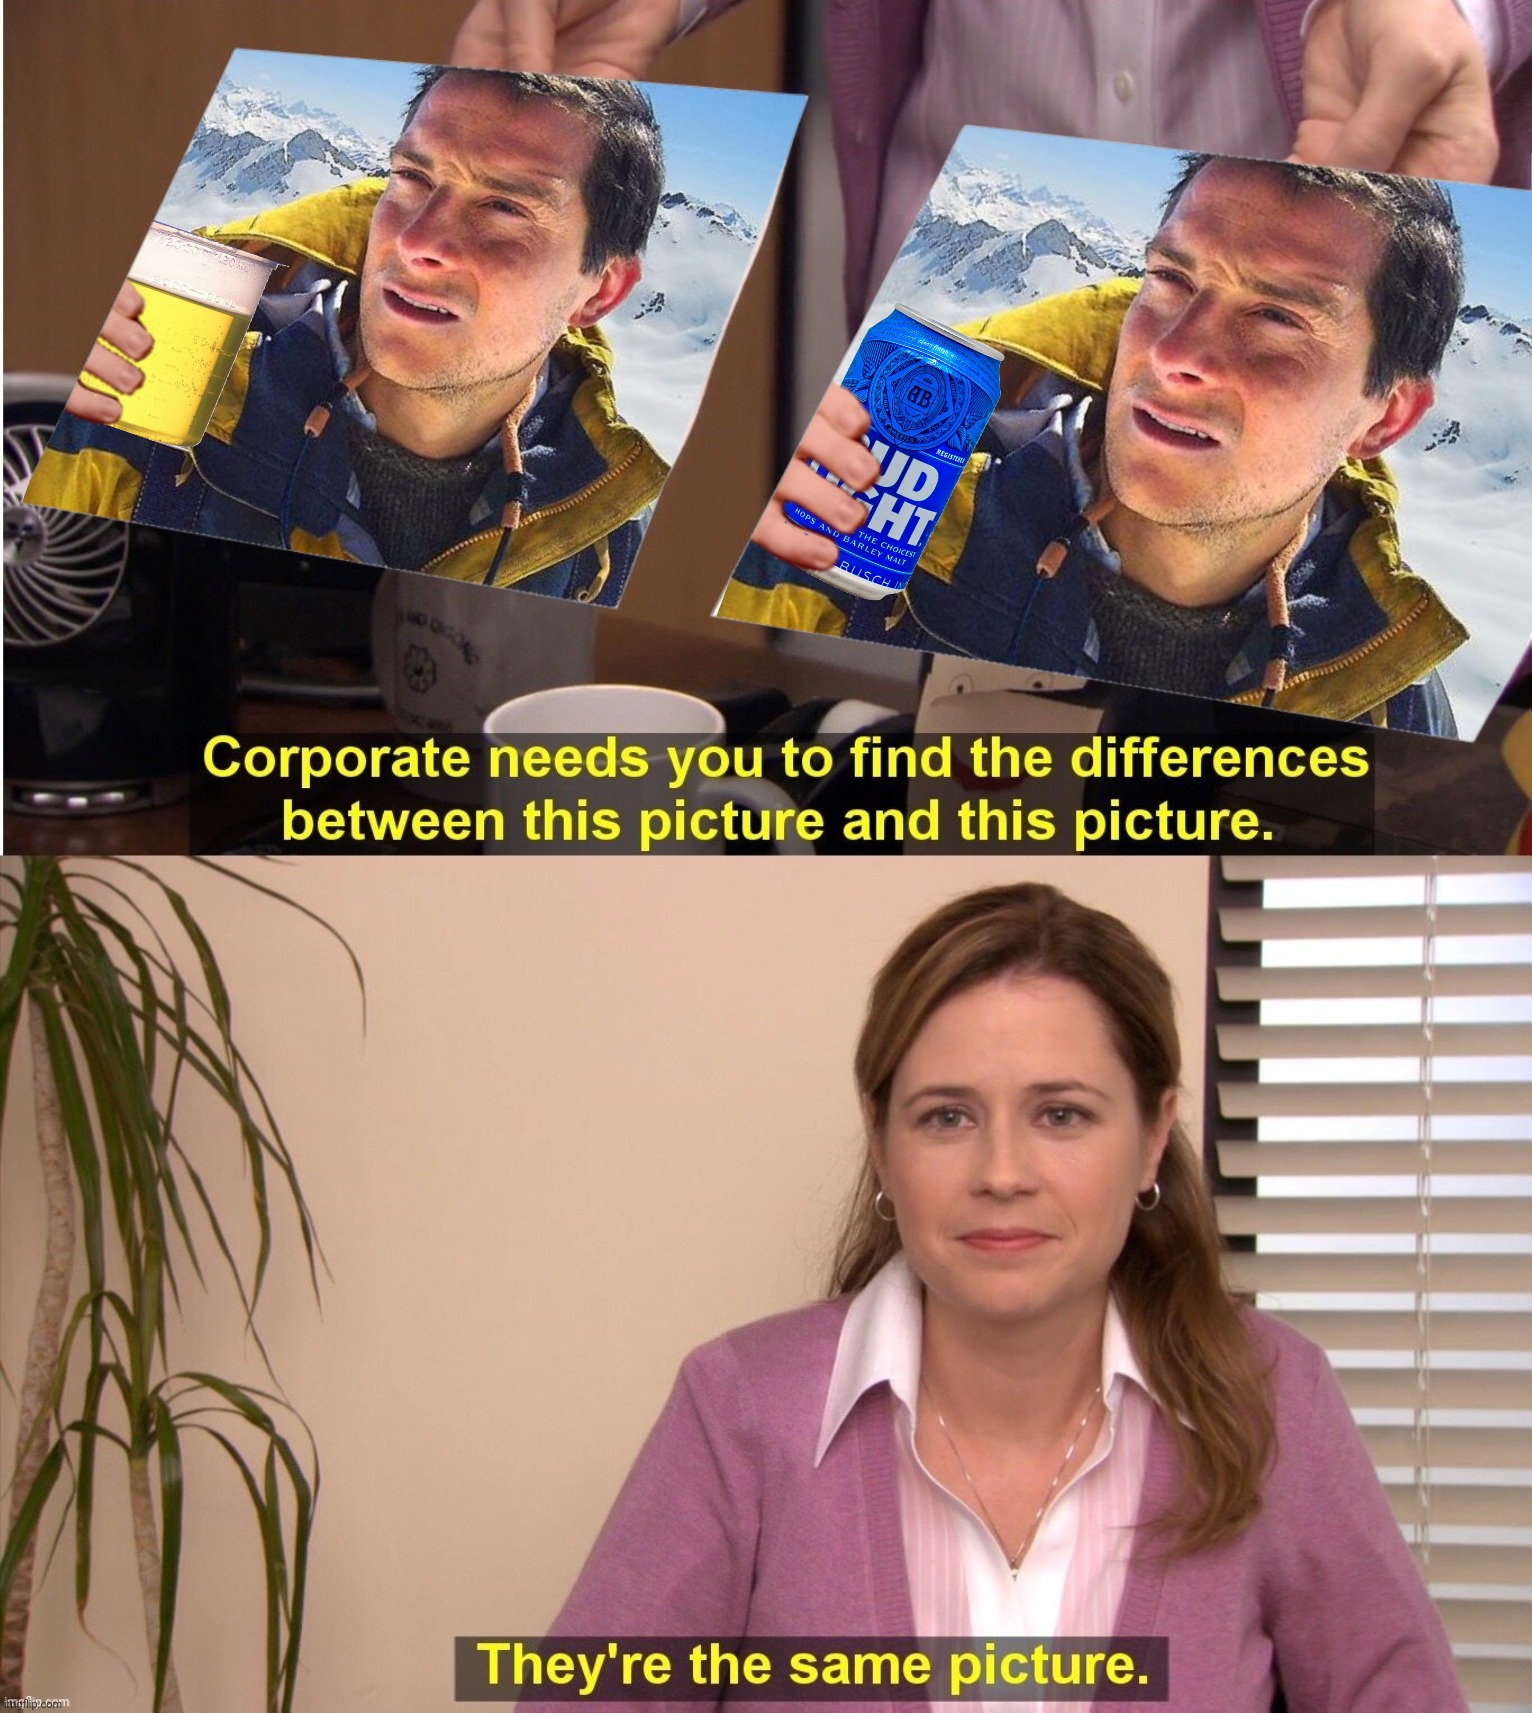 4 out of 5 survivalists recommend Bud Light for their followers that drink urine | image tagged in bad photoshop,bear grylls,bud light,urine | made w/ Imgflip meme maker